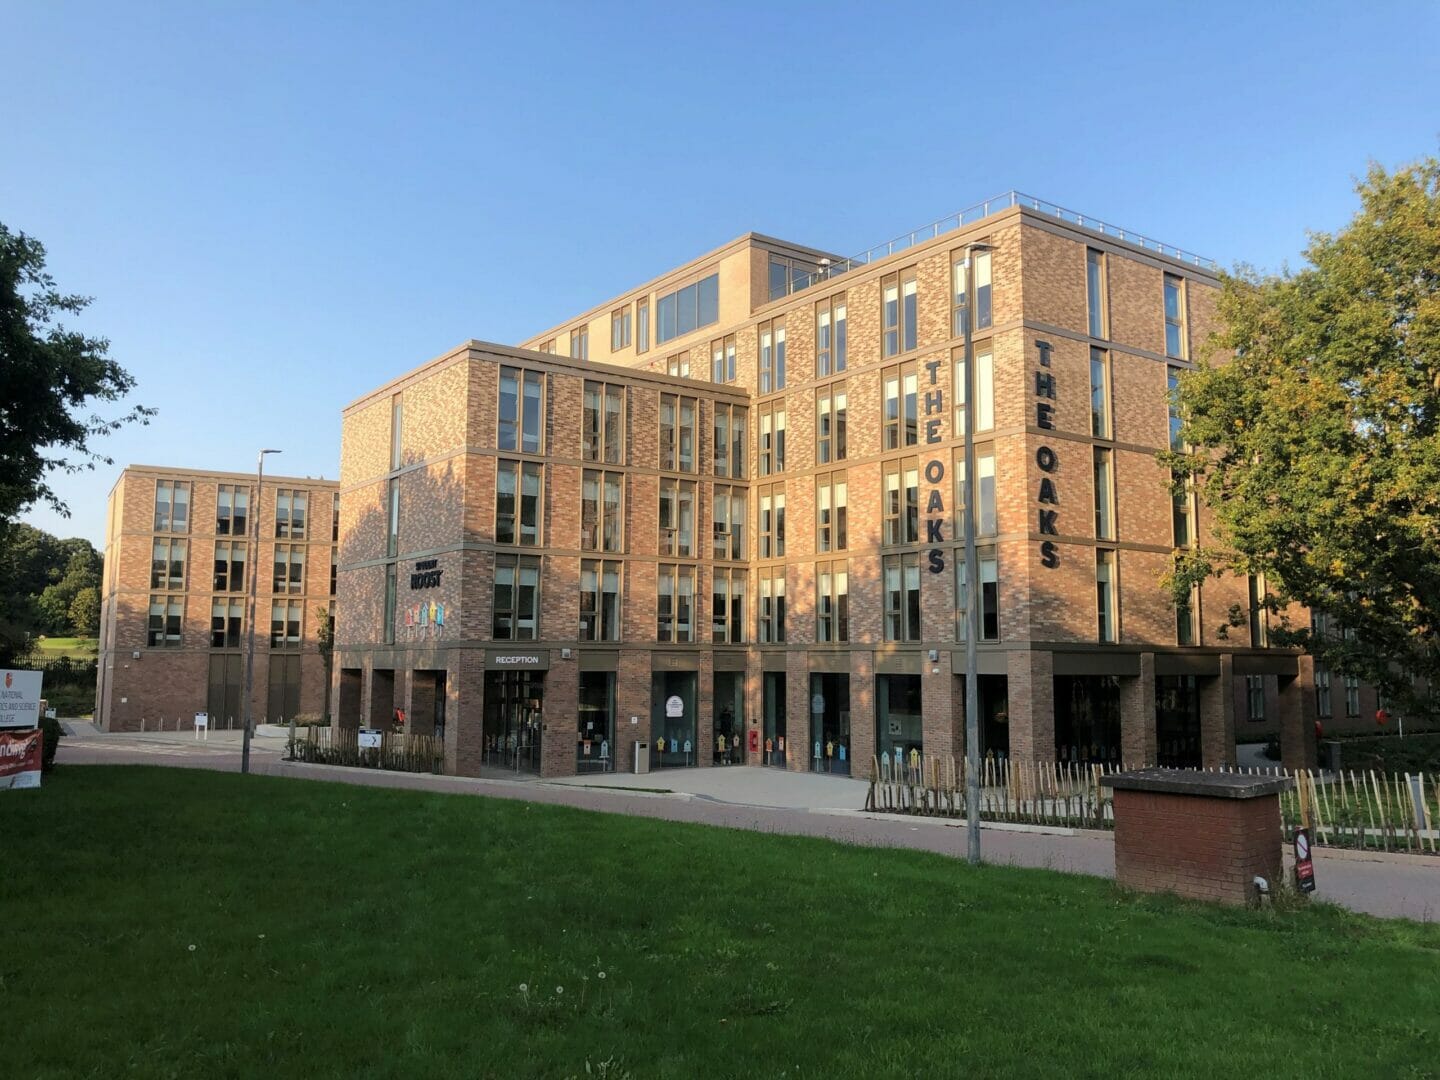 Phase one of major student accommodation completes in Coventry  @HWAengineers